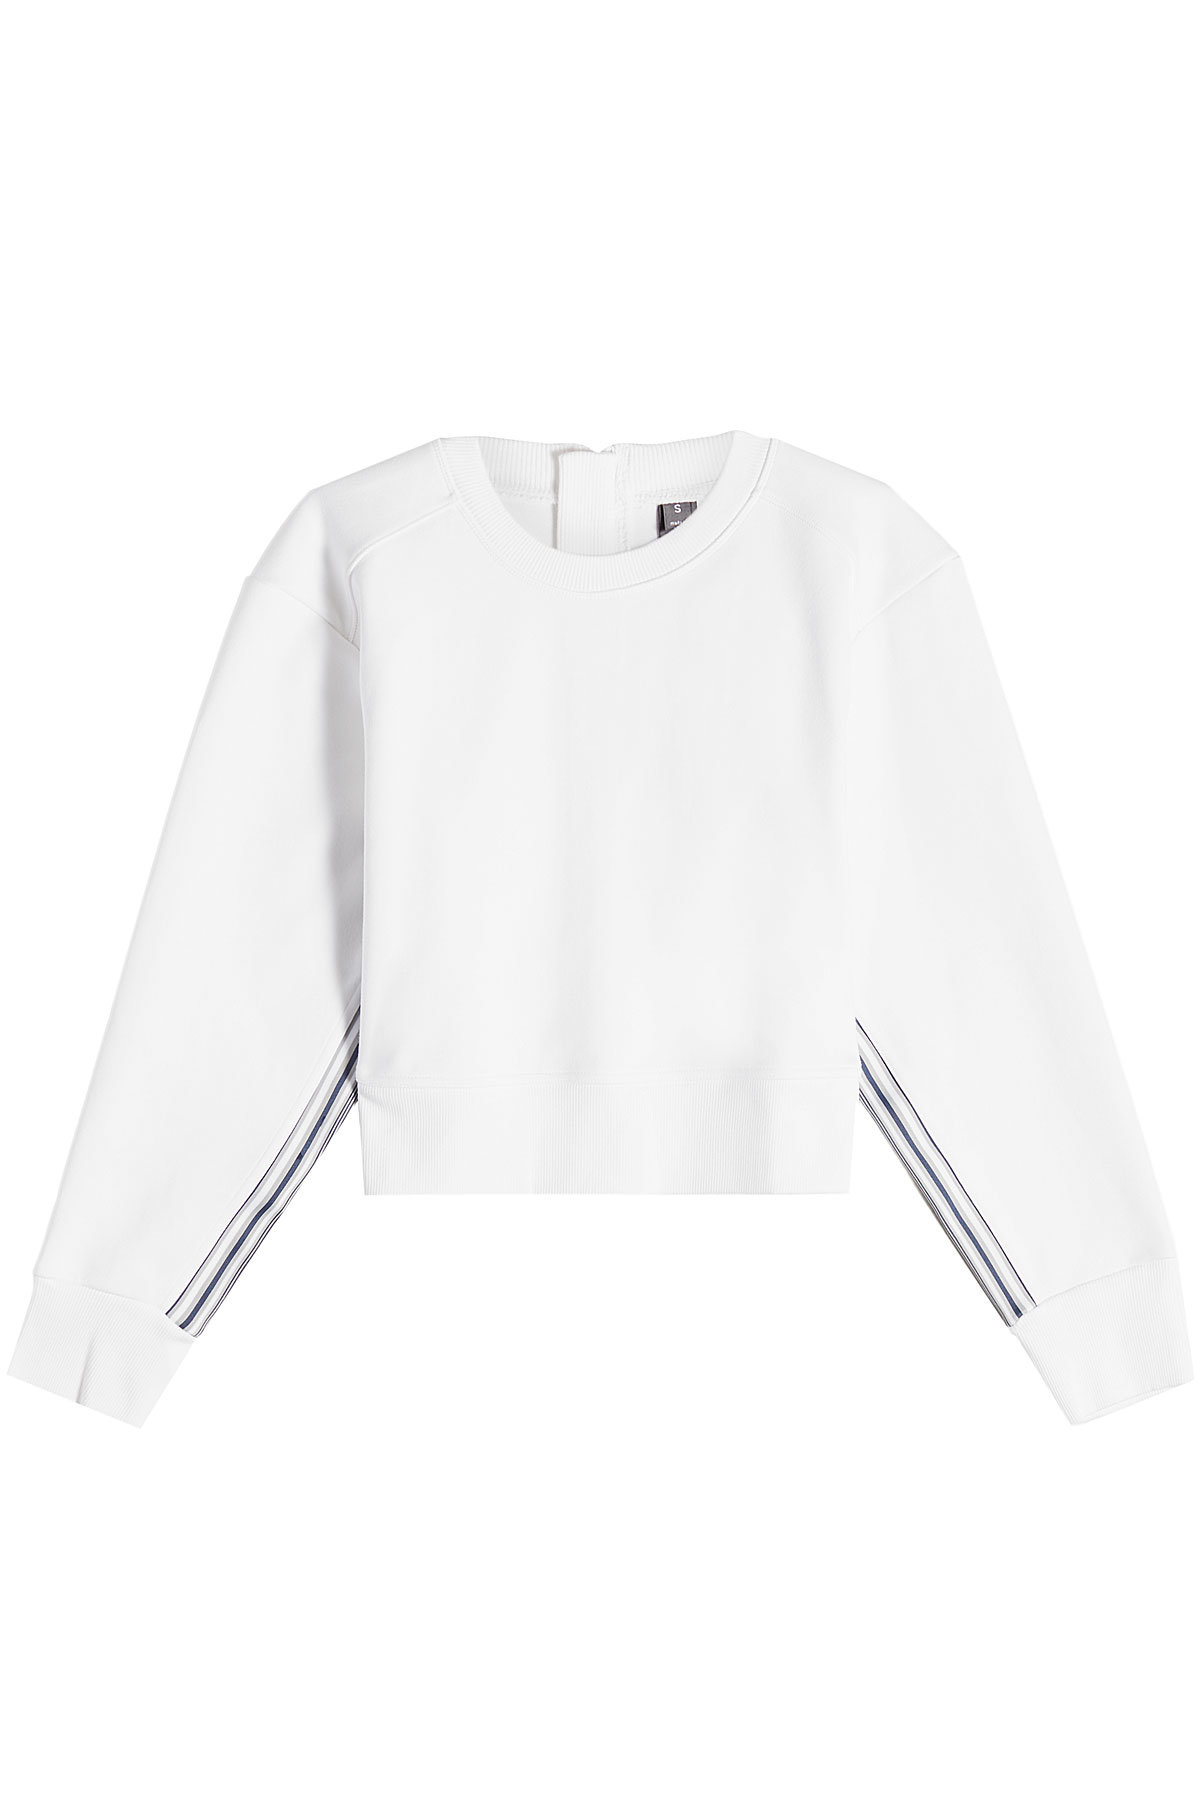 Train Ultimate All-in-One by adidas by Stella McCartney